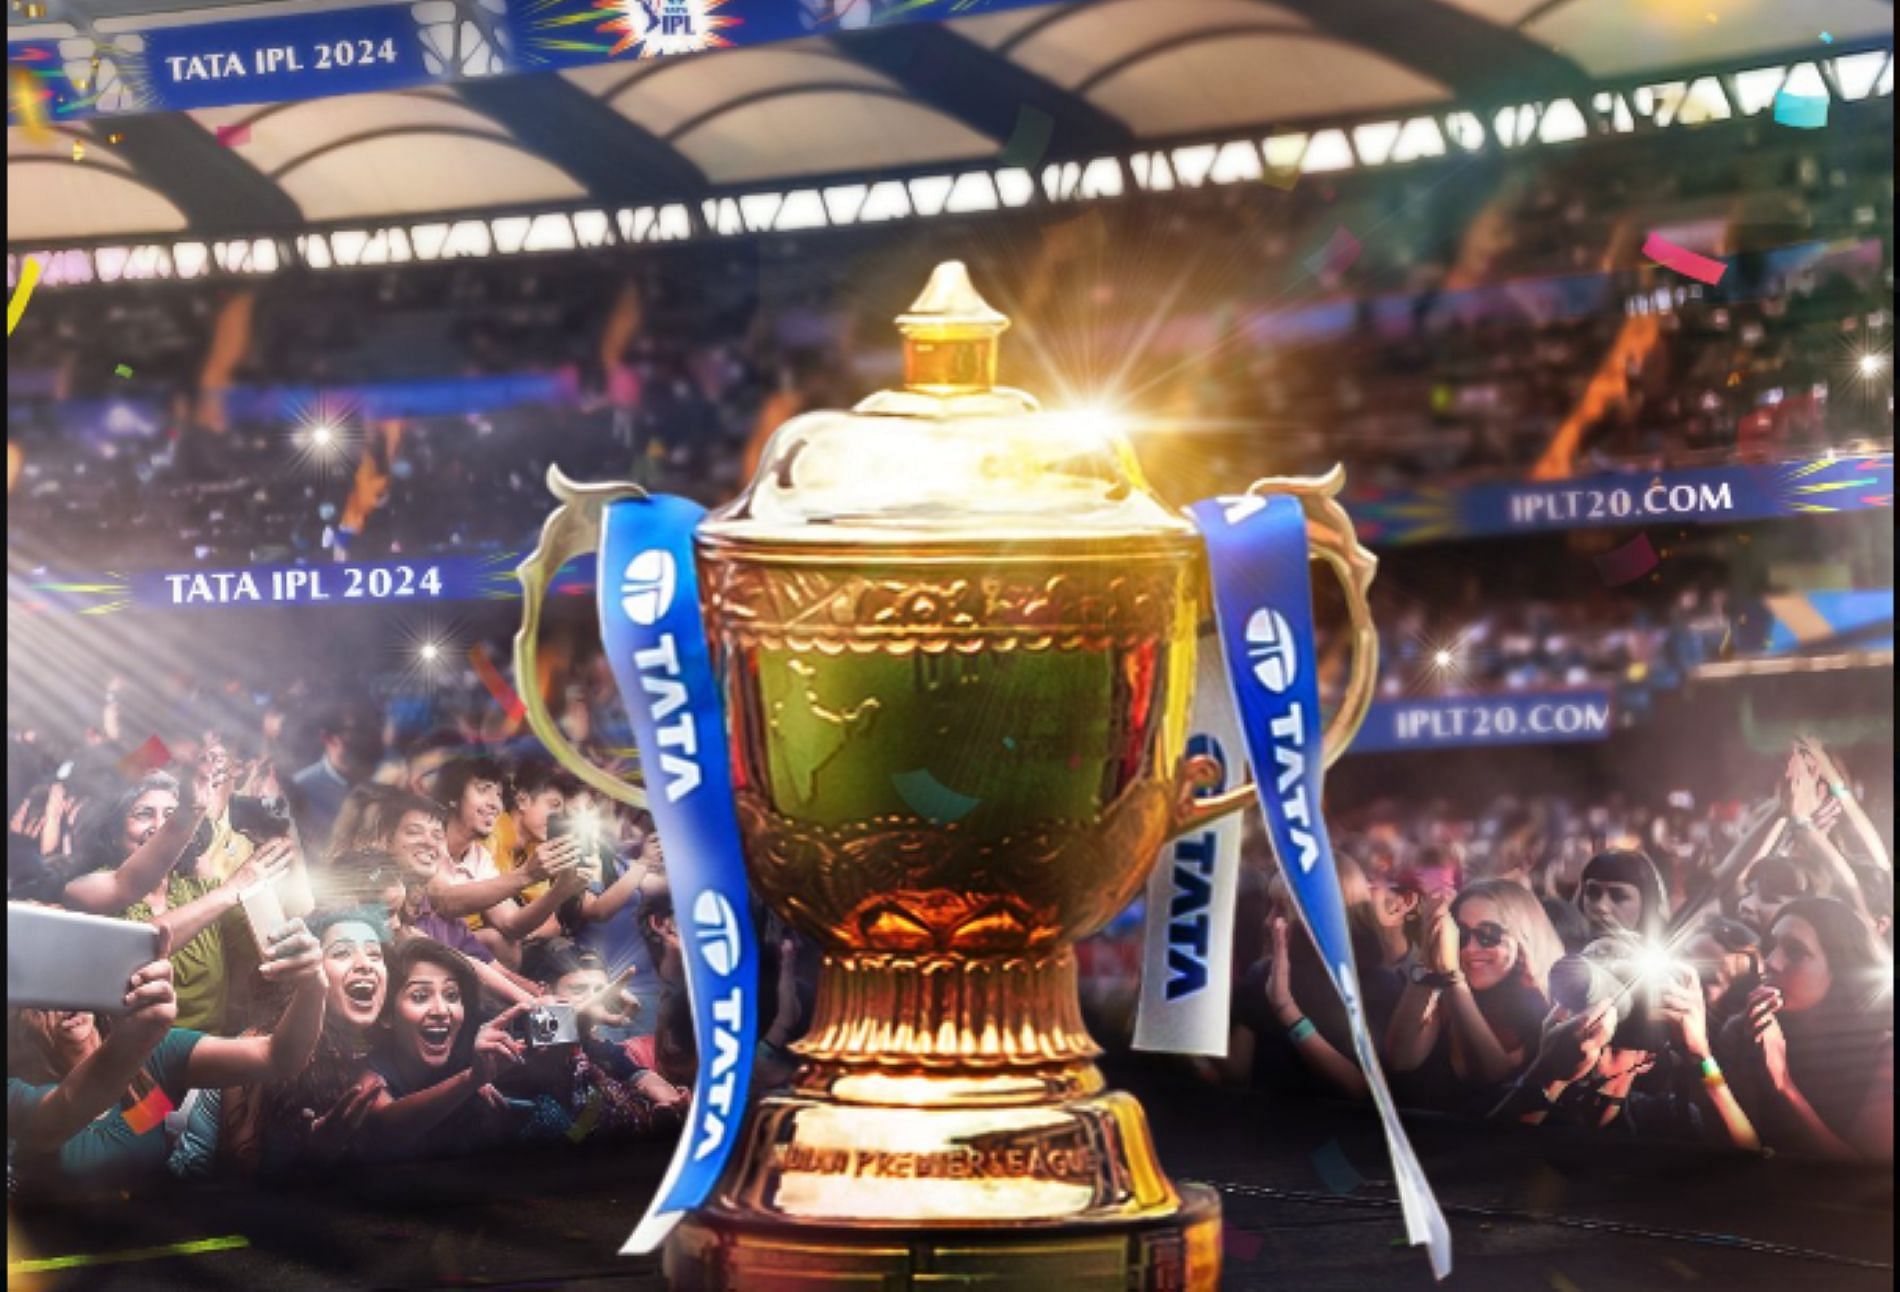 IPL 2024 continues to set viewership records [Credit: IPL Twitter handle]